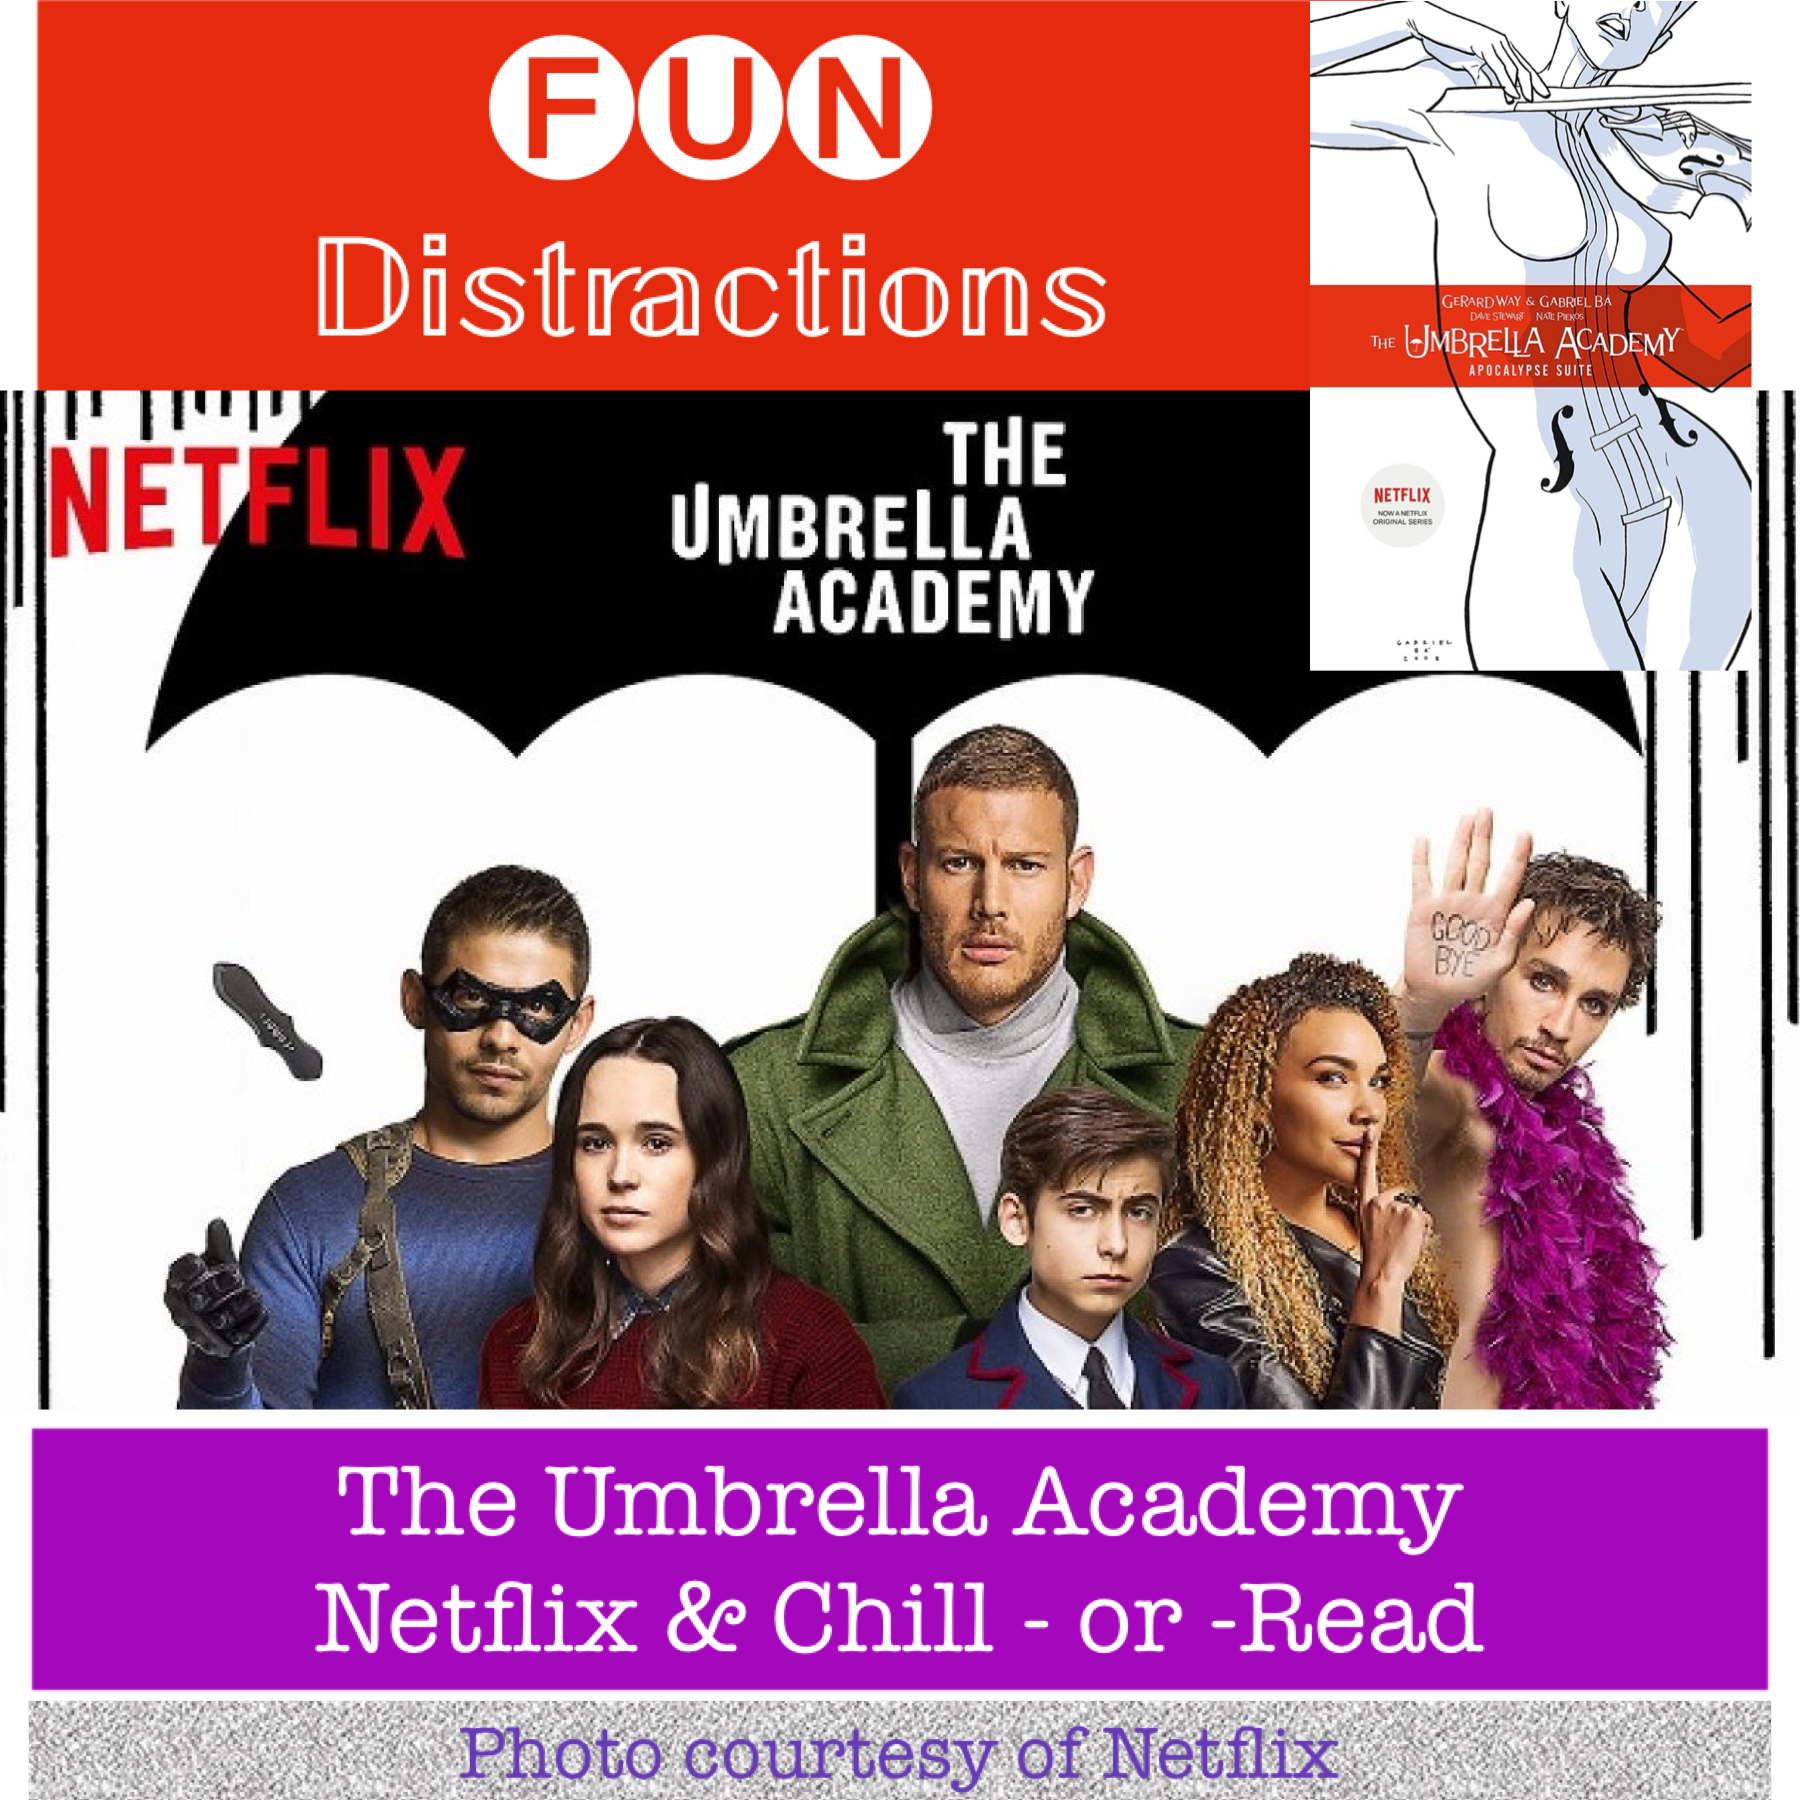 Image advertising the Library’s FUN Distractions series post about The Umbrella Academy 